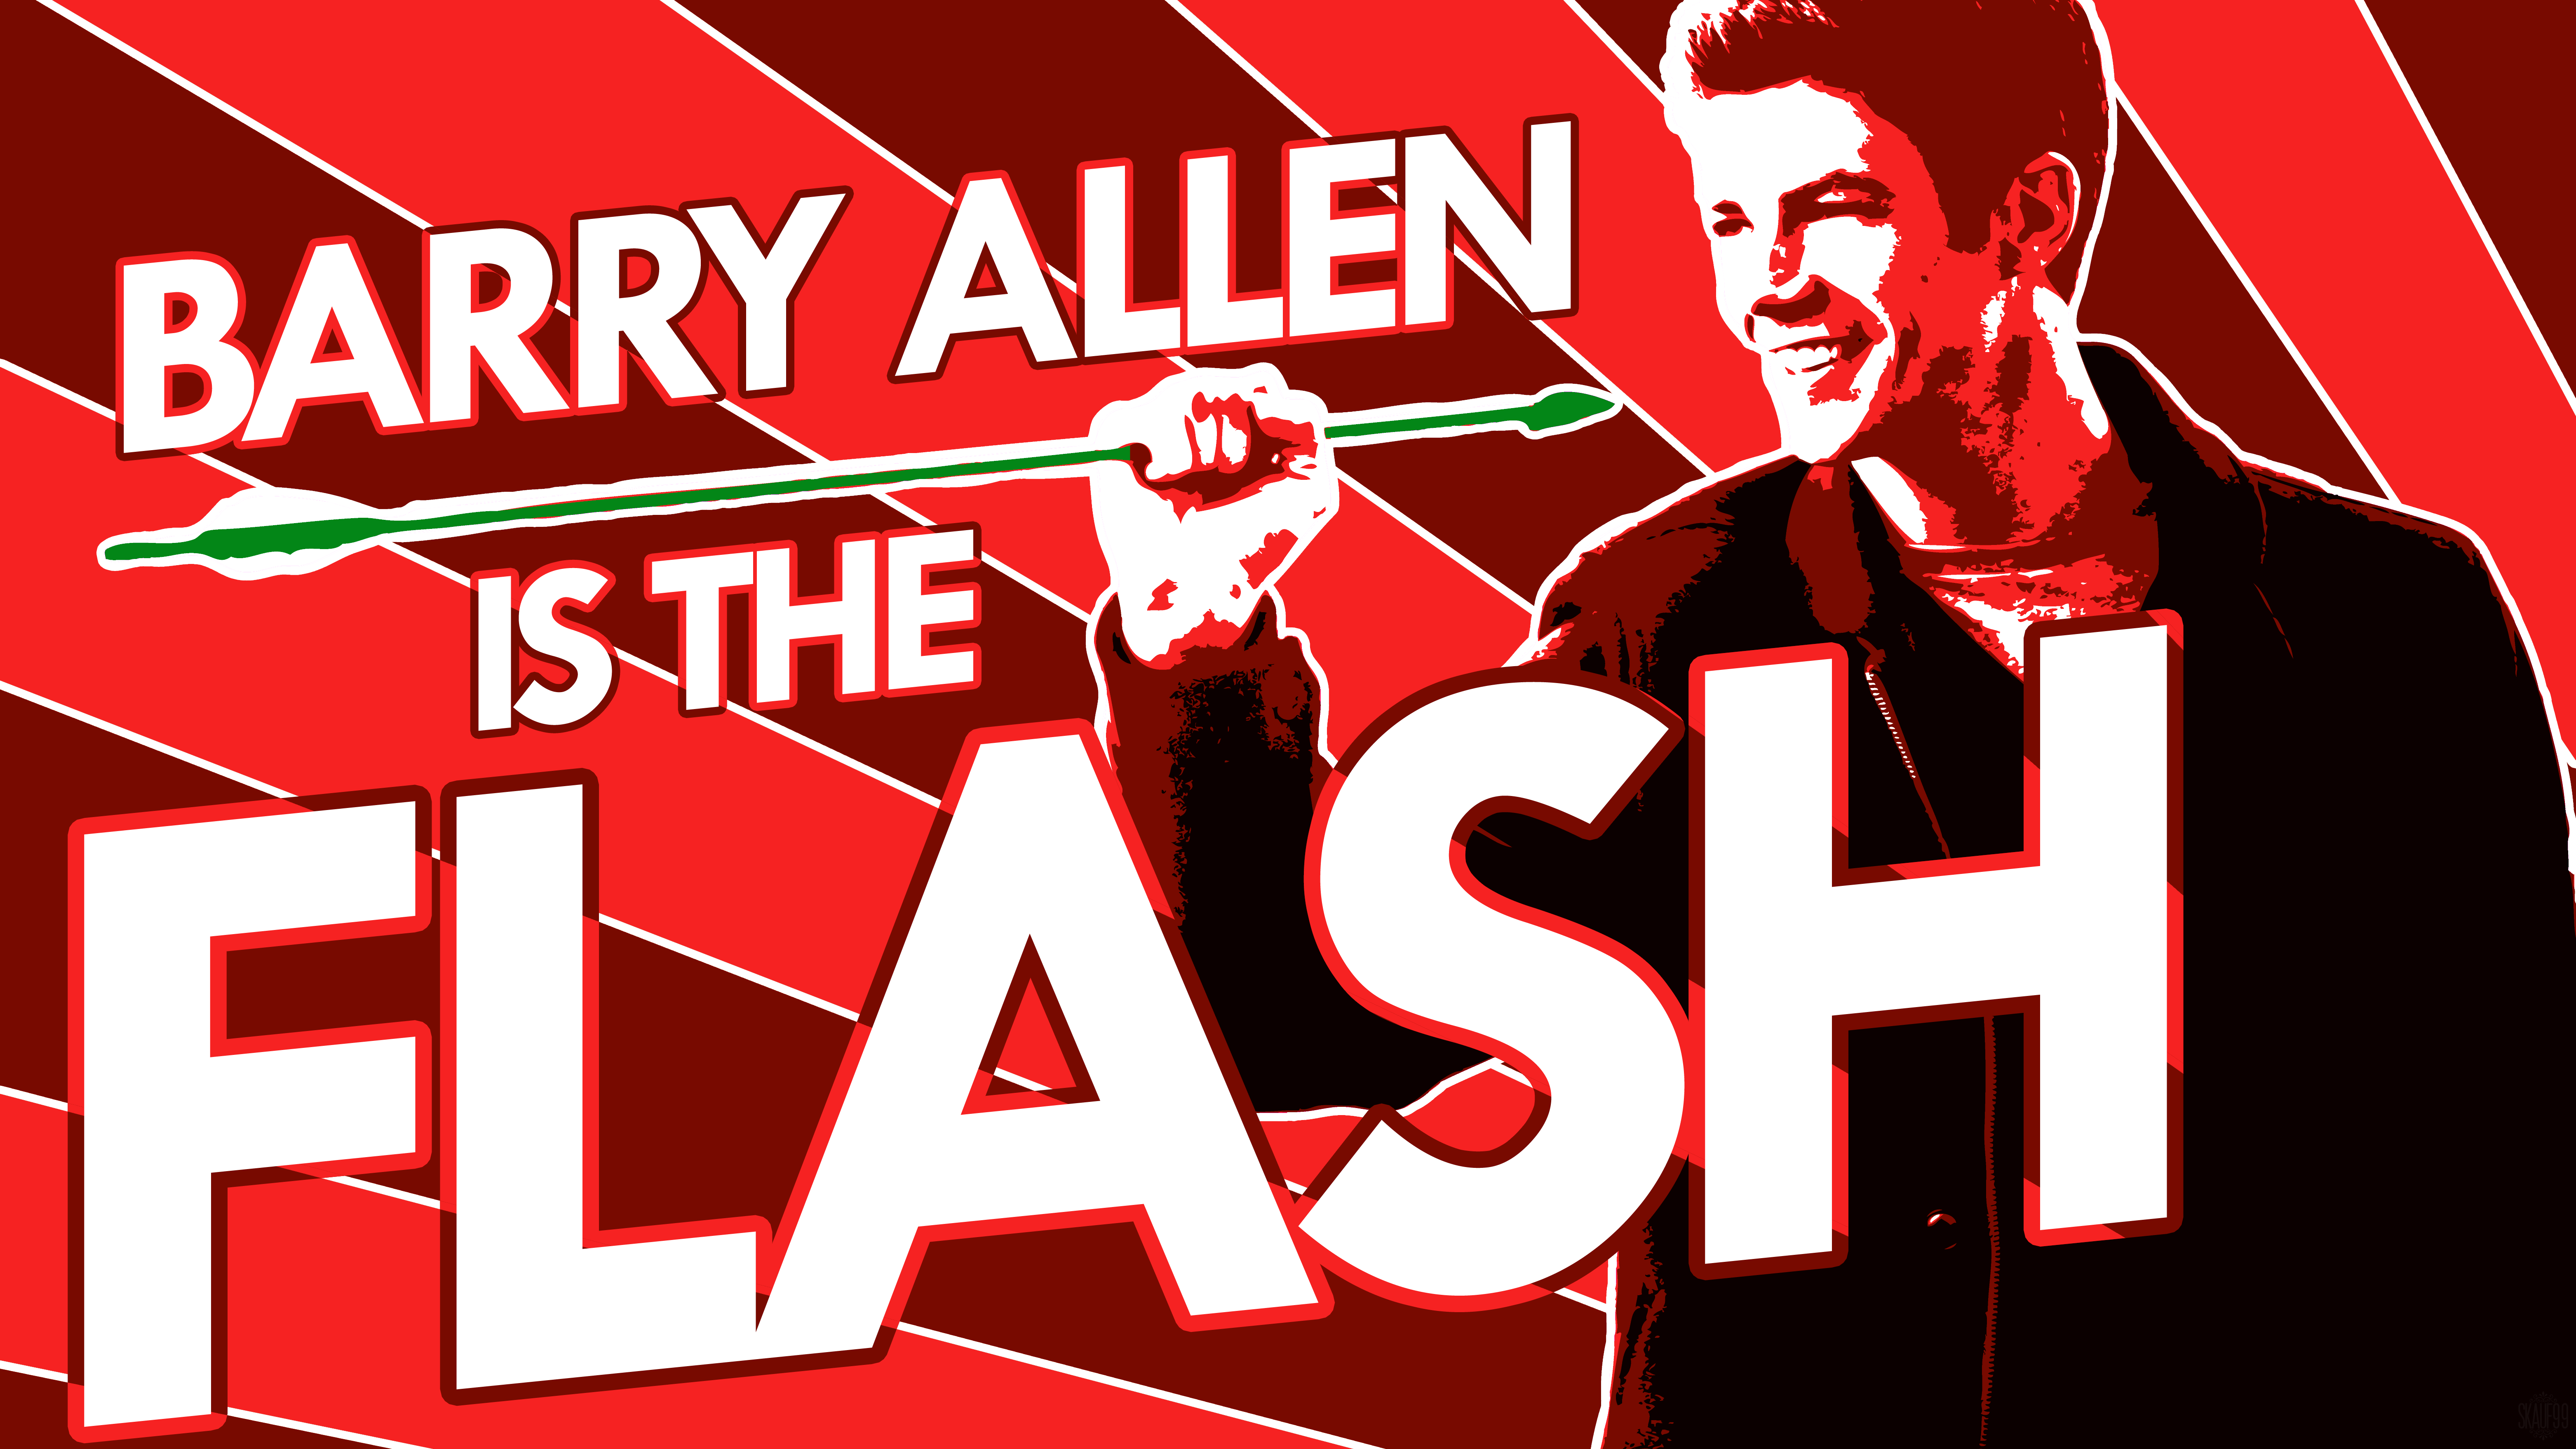 Barry Allen Flash Grant Gustin Red The Flash 2014 6249x3515